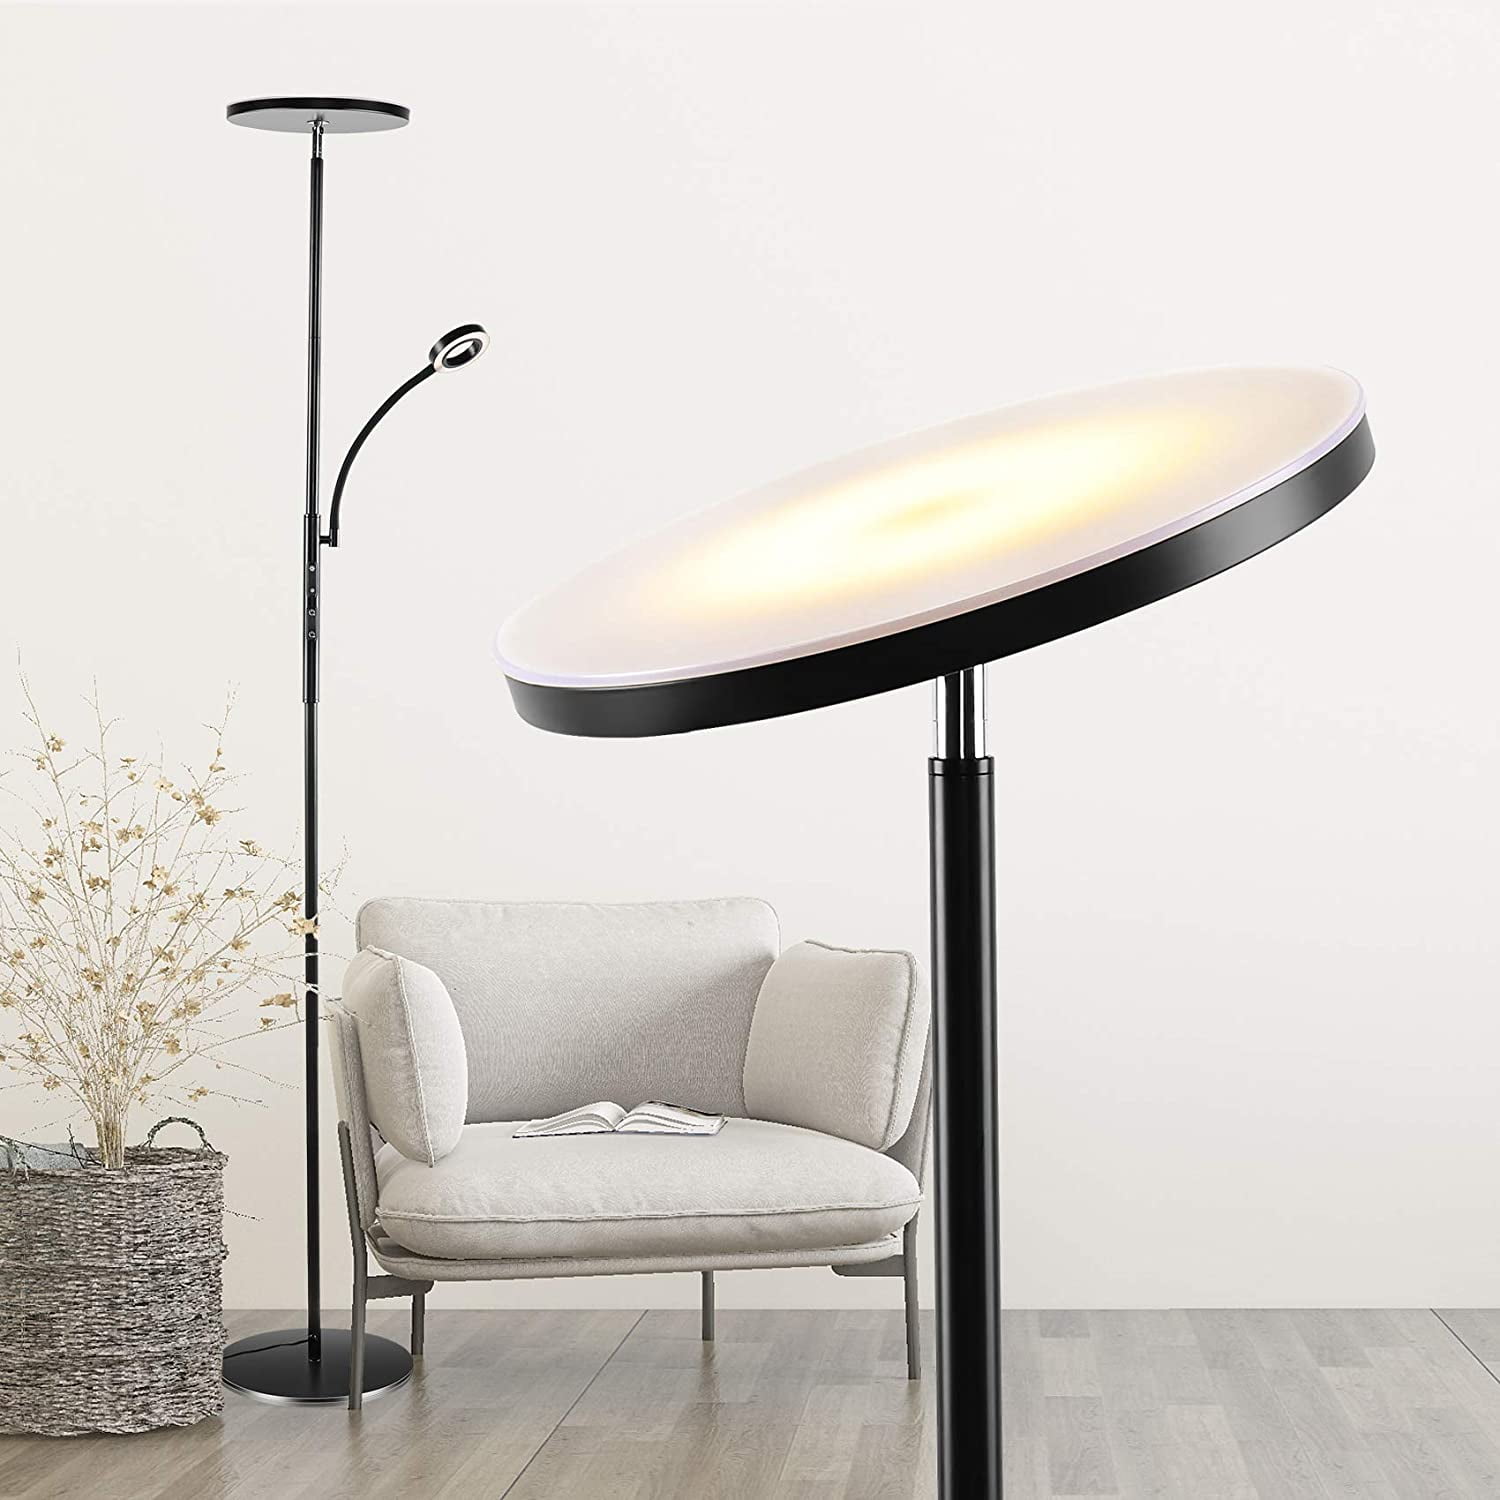 Torchiere Floor Lamp with Adjustable Side Reading Lamp Floor Lamp Bedroom Black Timing Function Use for Office Living Room Dimmable LED Floor Lamp with 3 Color Temperatures 